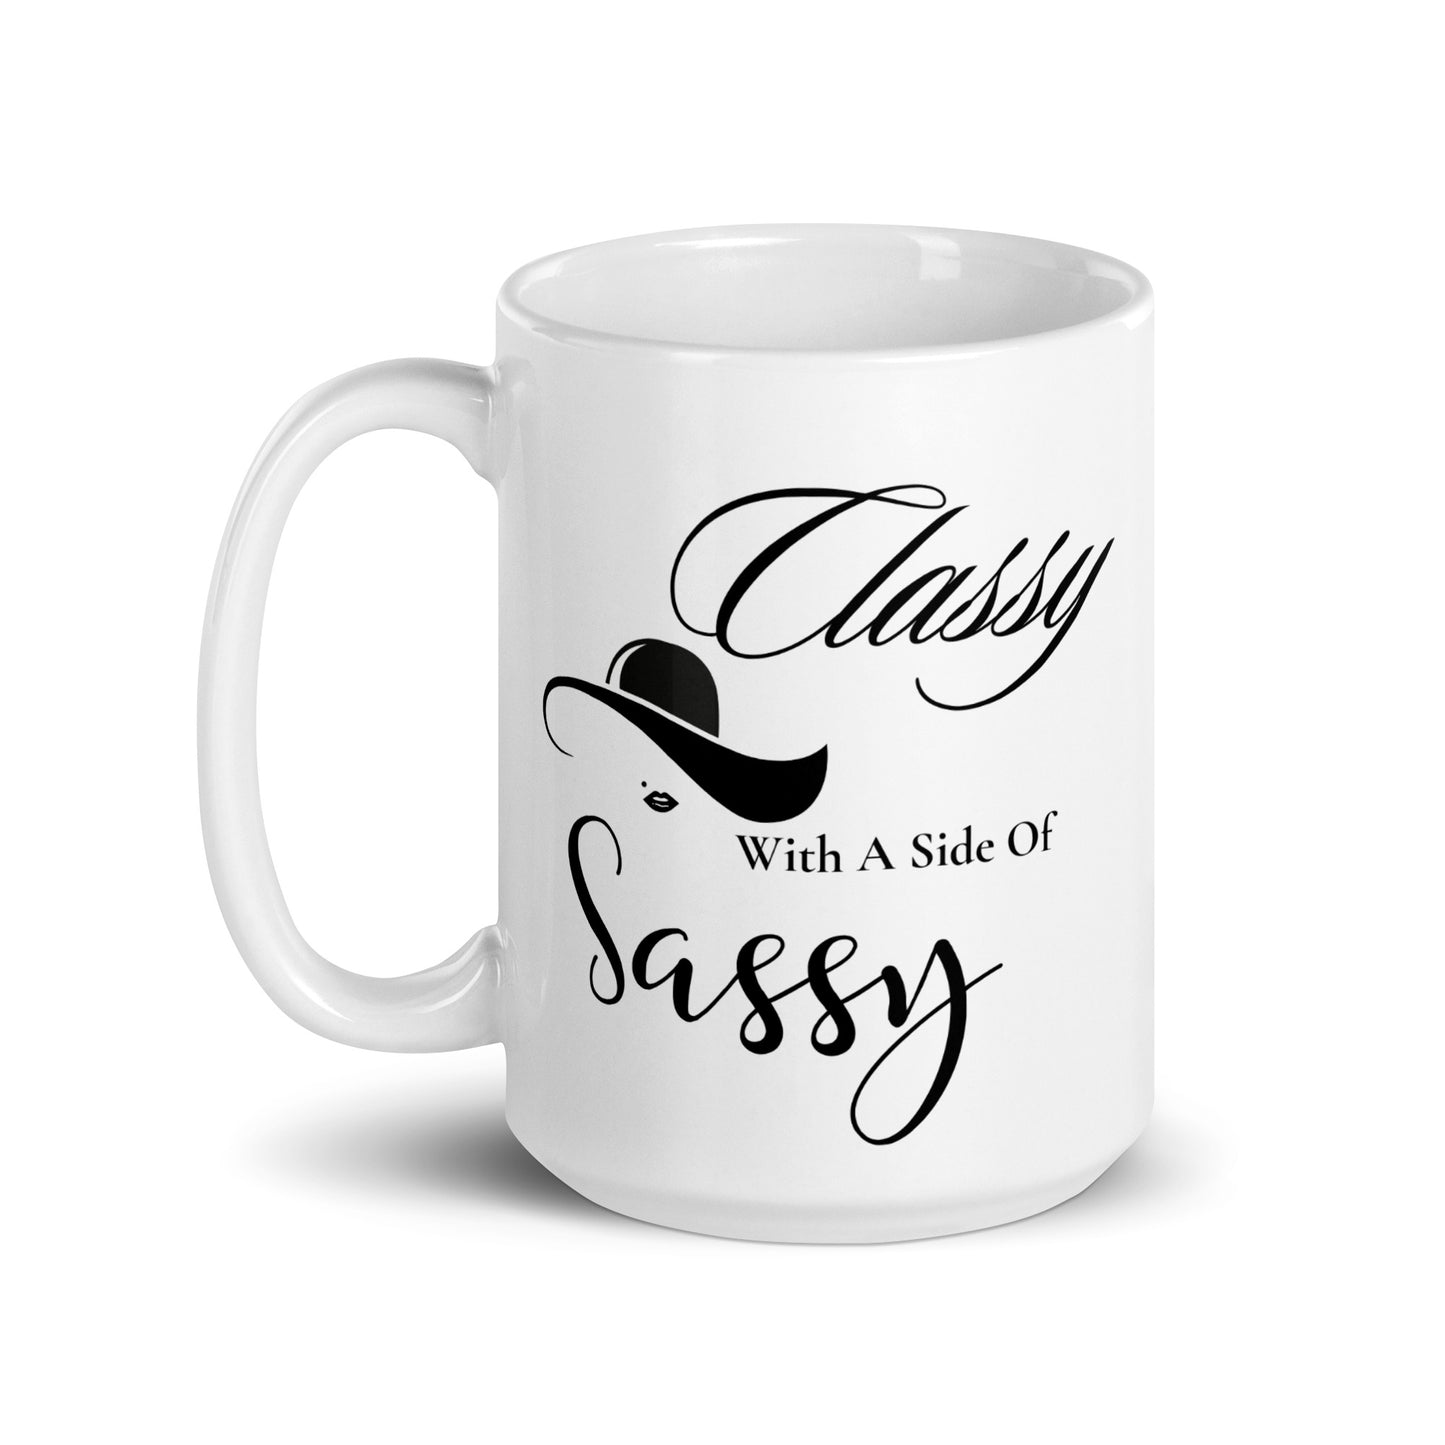 Classy with a side of Sassy White glossy mug